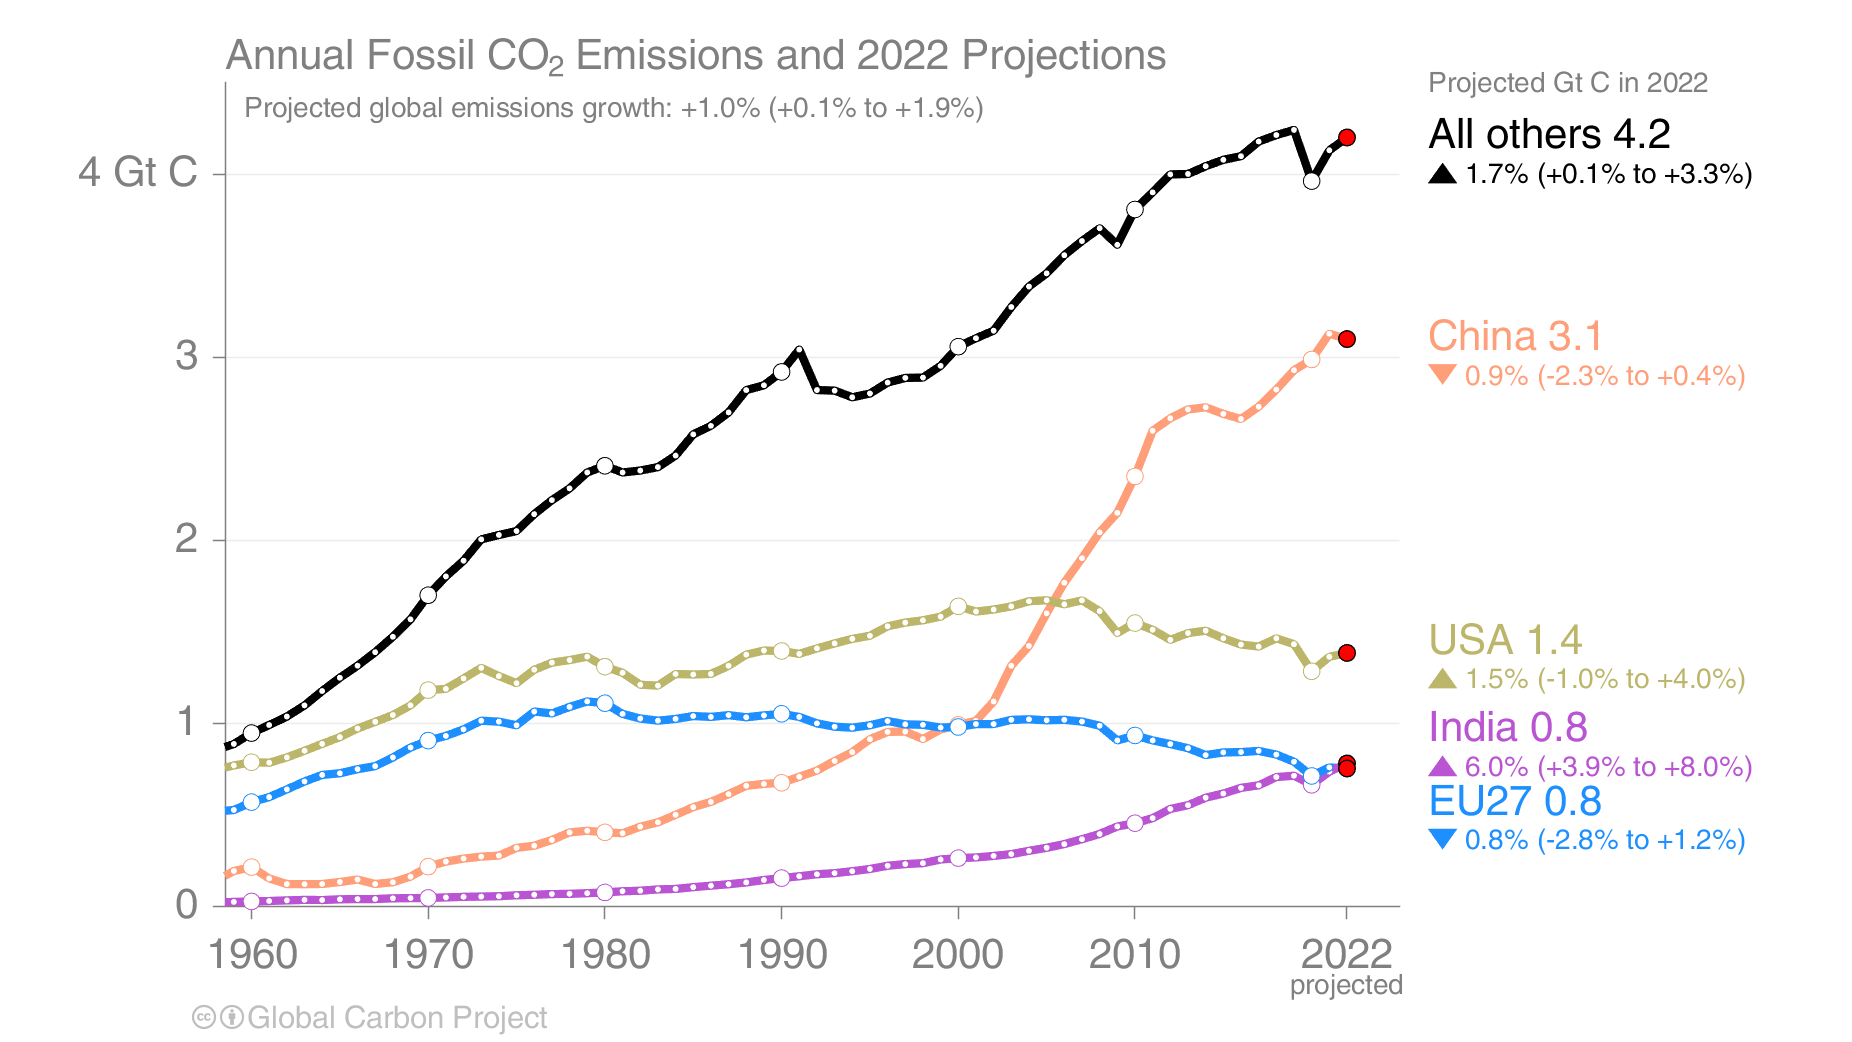 Timeseries of carbon emissions from China, USA, India and EU27 from 1960 to 2022.